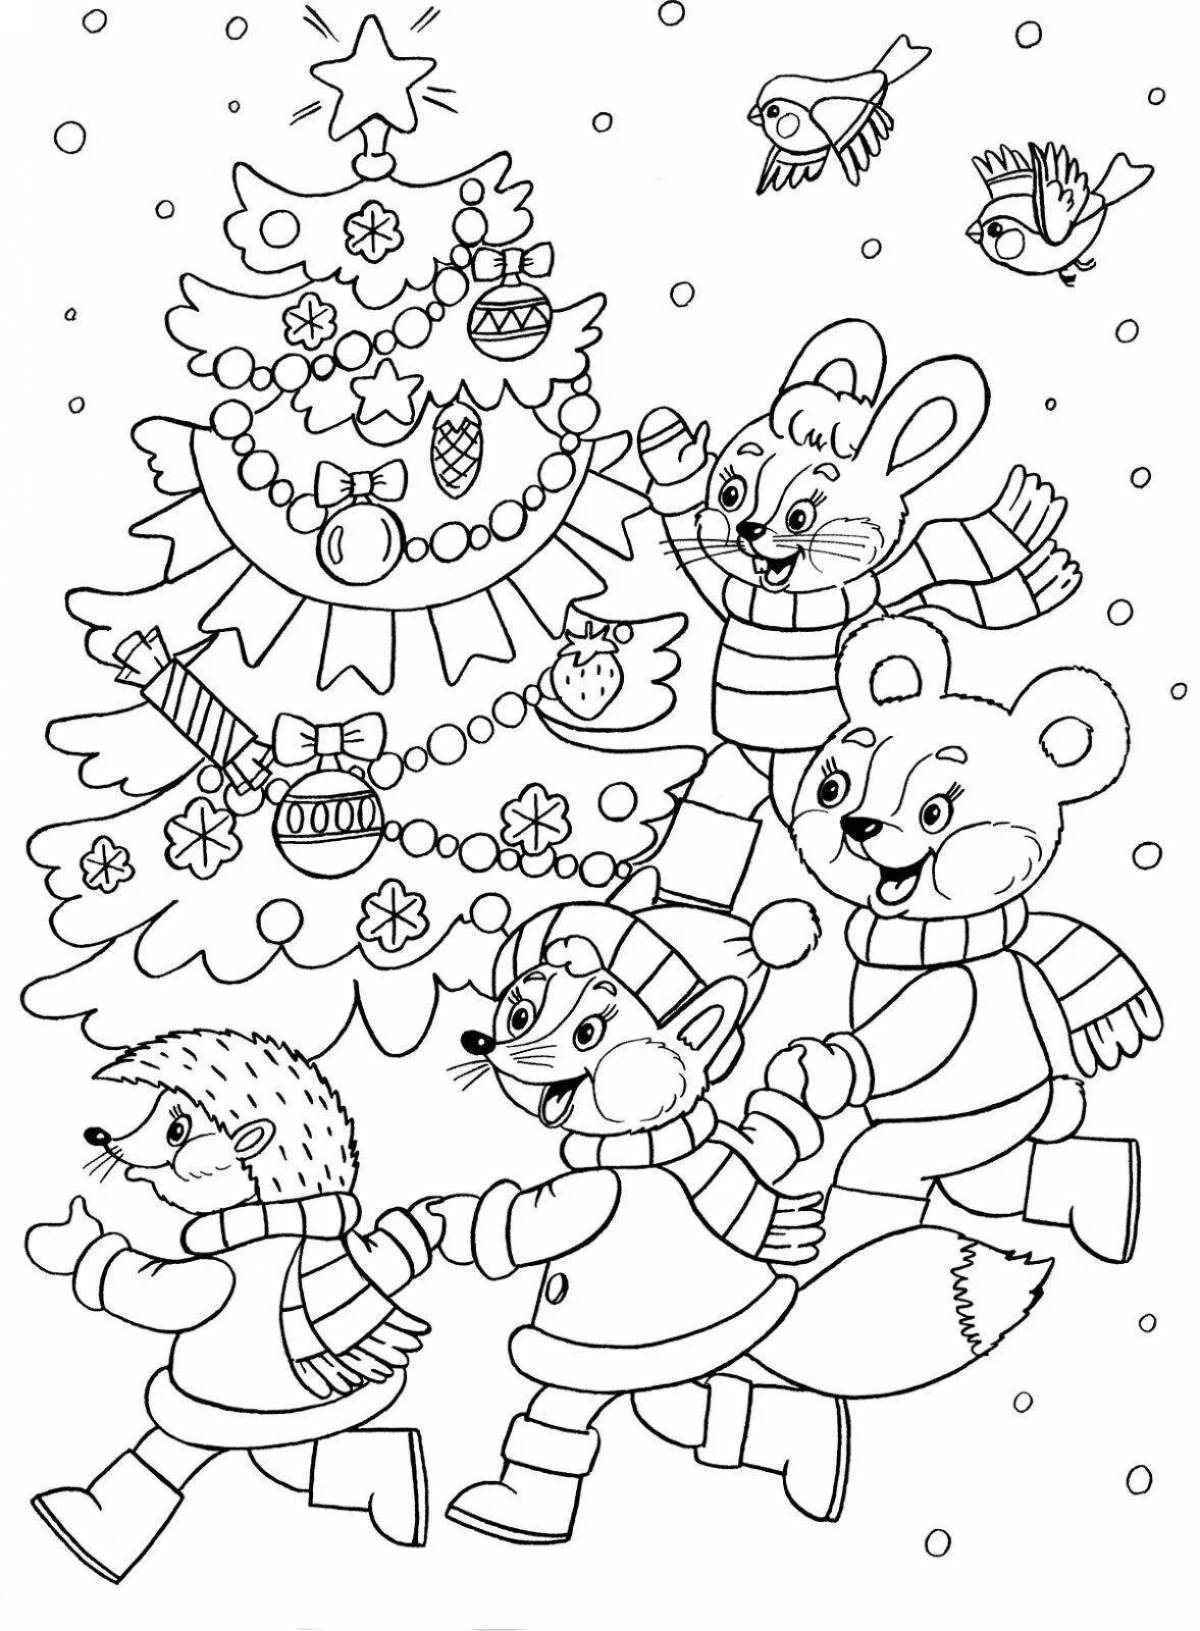 Merry Christmas drawing for children